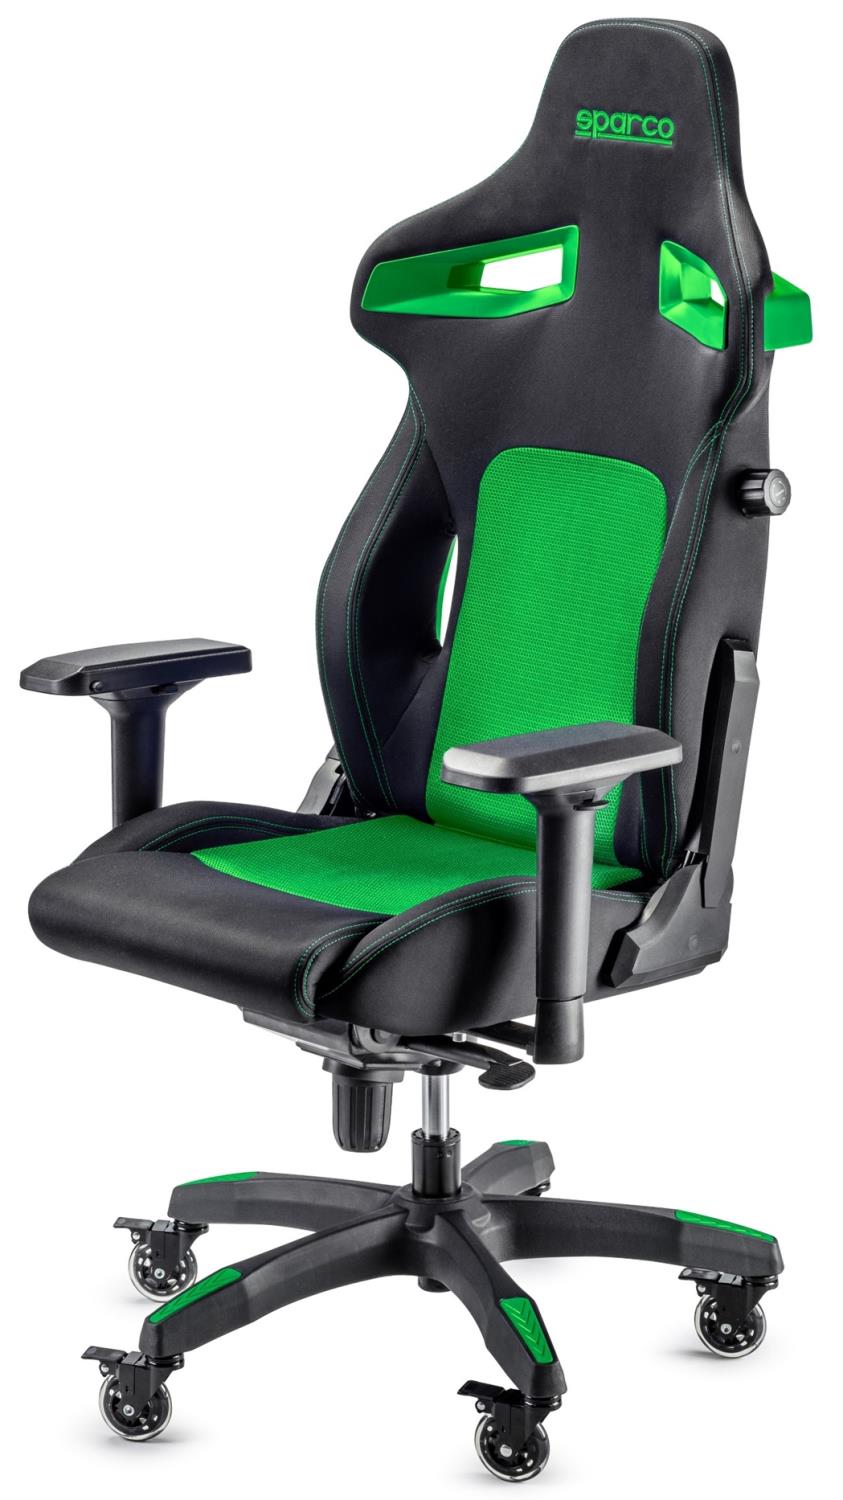 Sparco STINT Series Gaming Chair